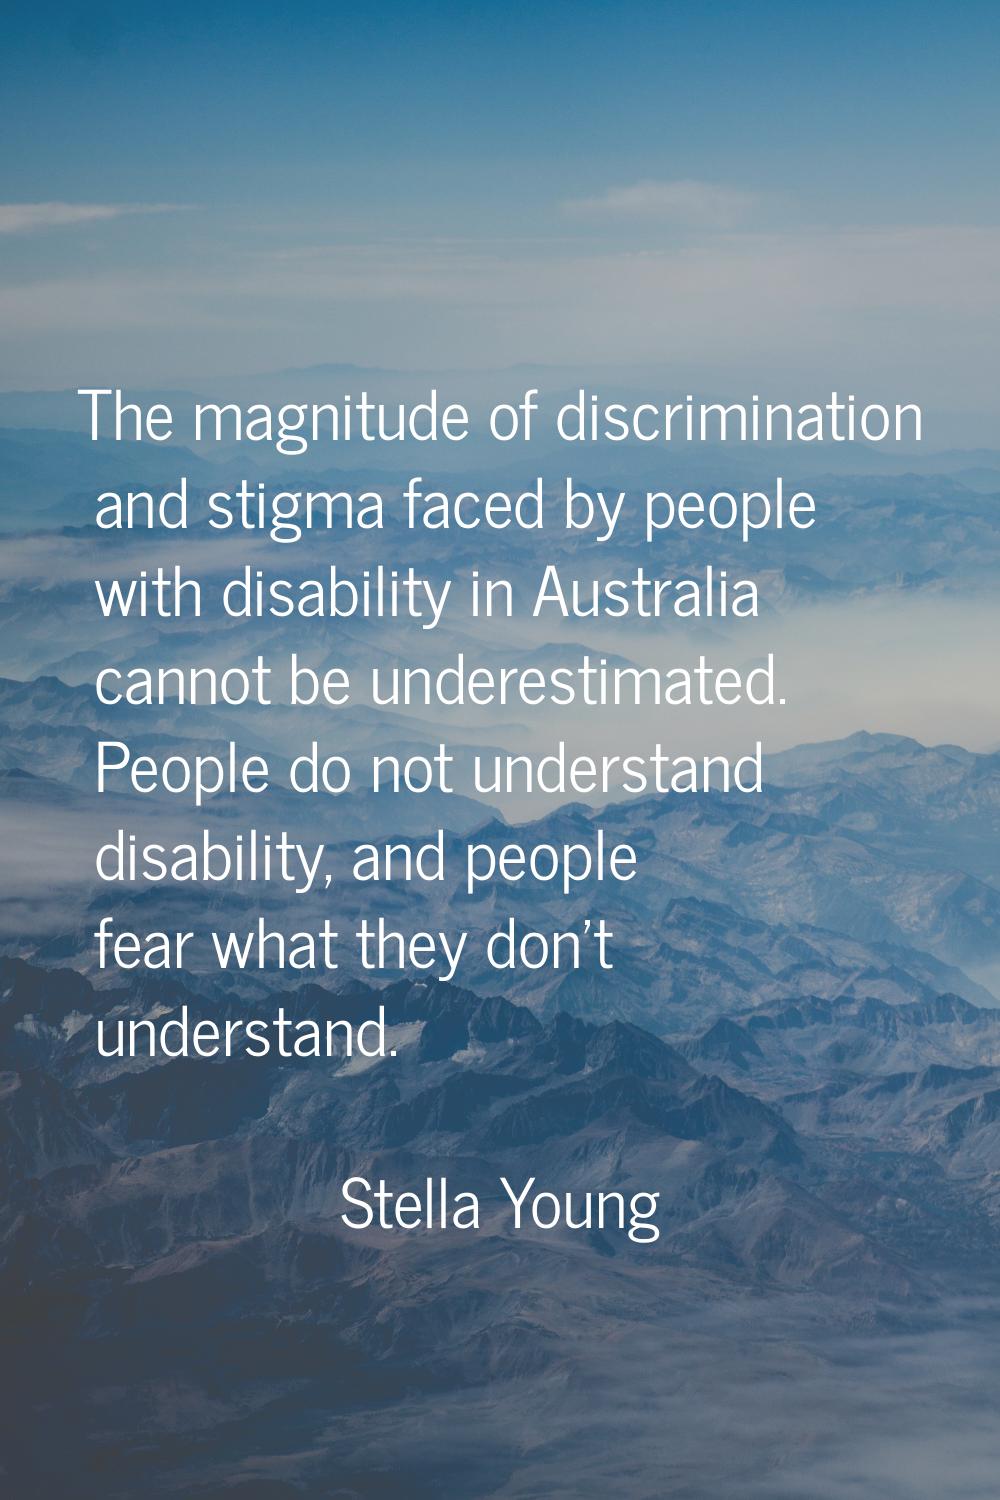 The magnitude of discrimination and stigma faced by people with disability in Australia cannot be u